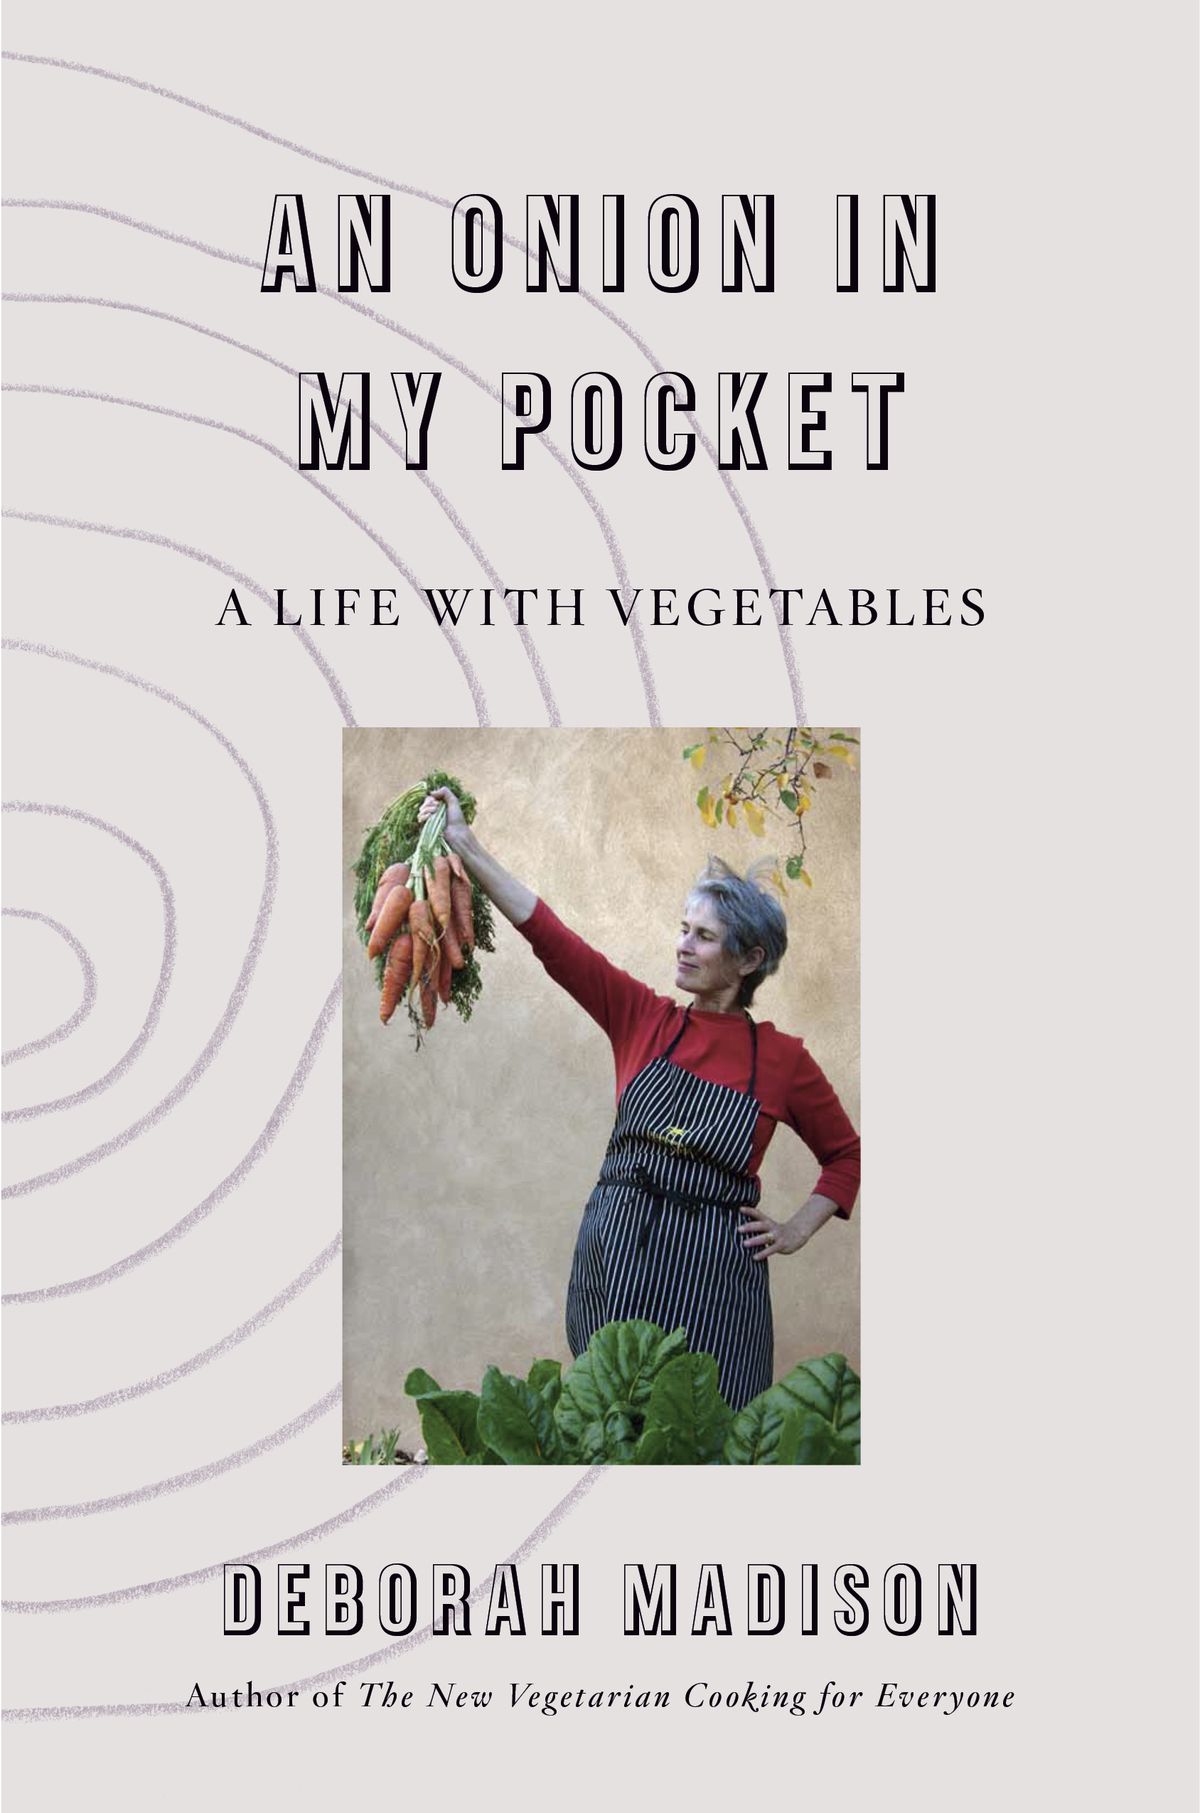 A woman holds up a bushel of carrots on the book cover for An Onion in My Pocket